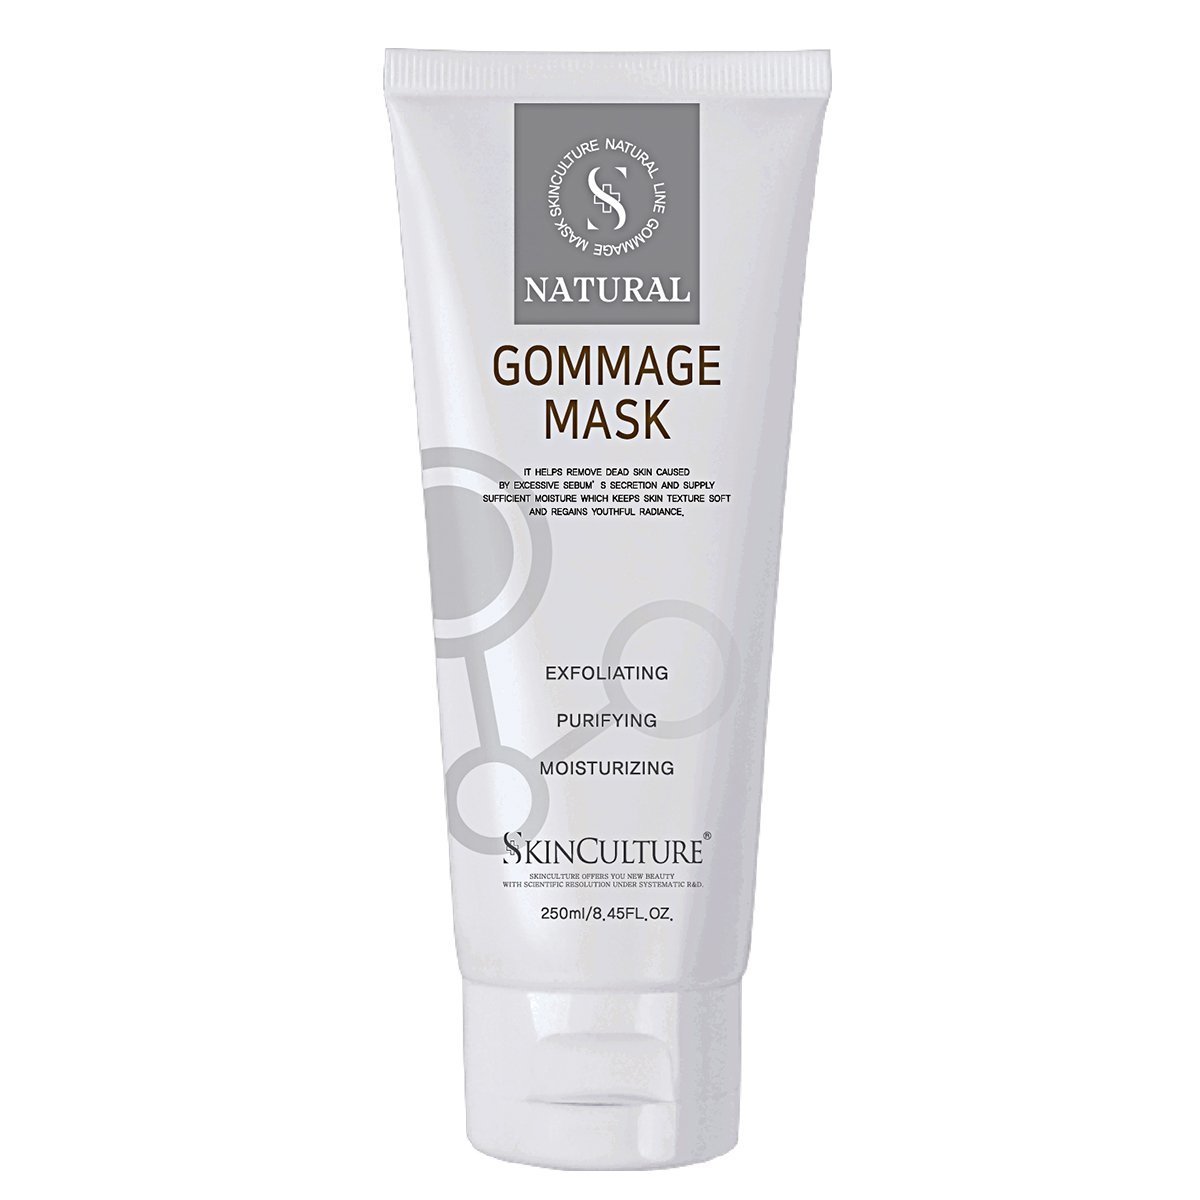 Natural Gommage Mask